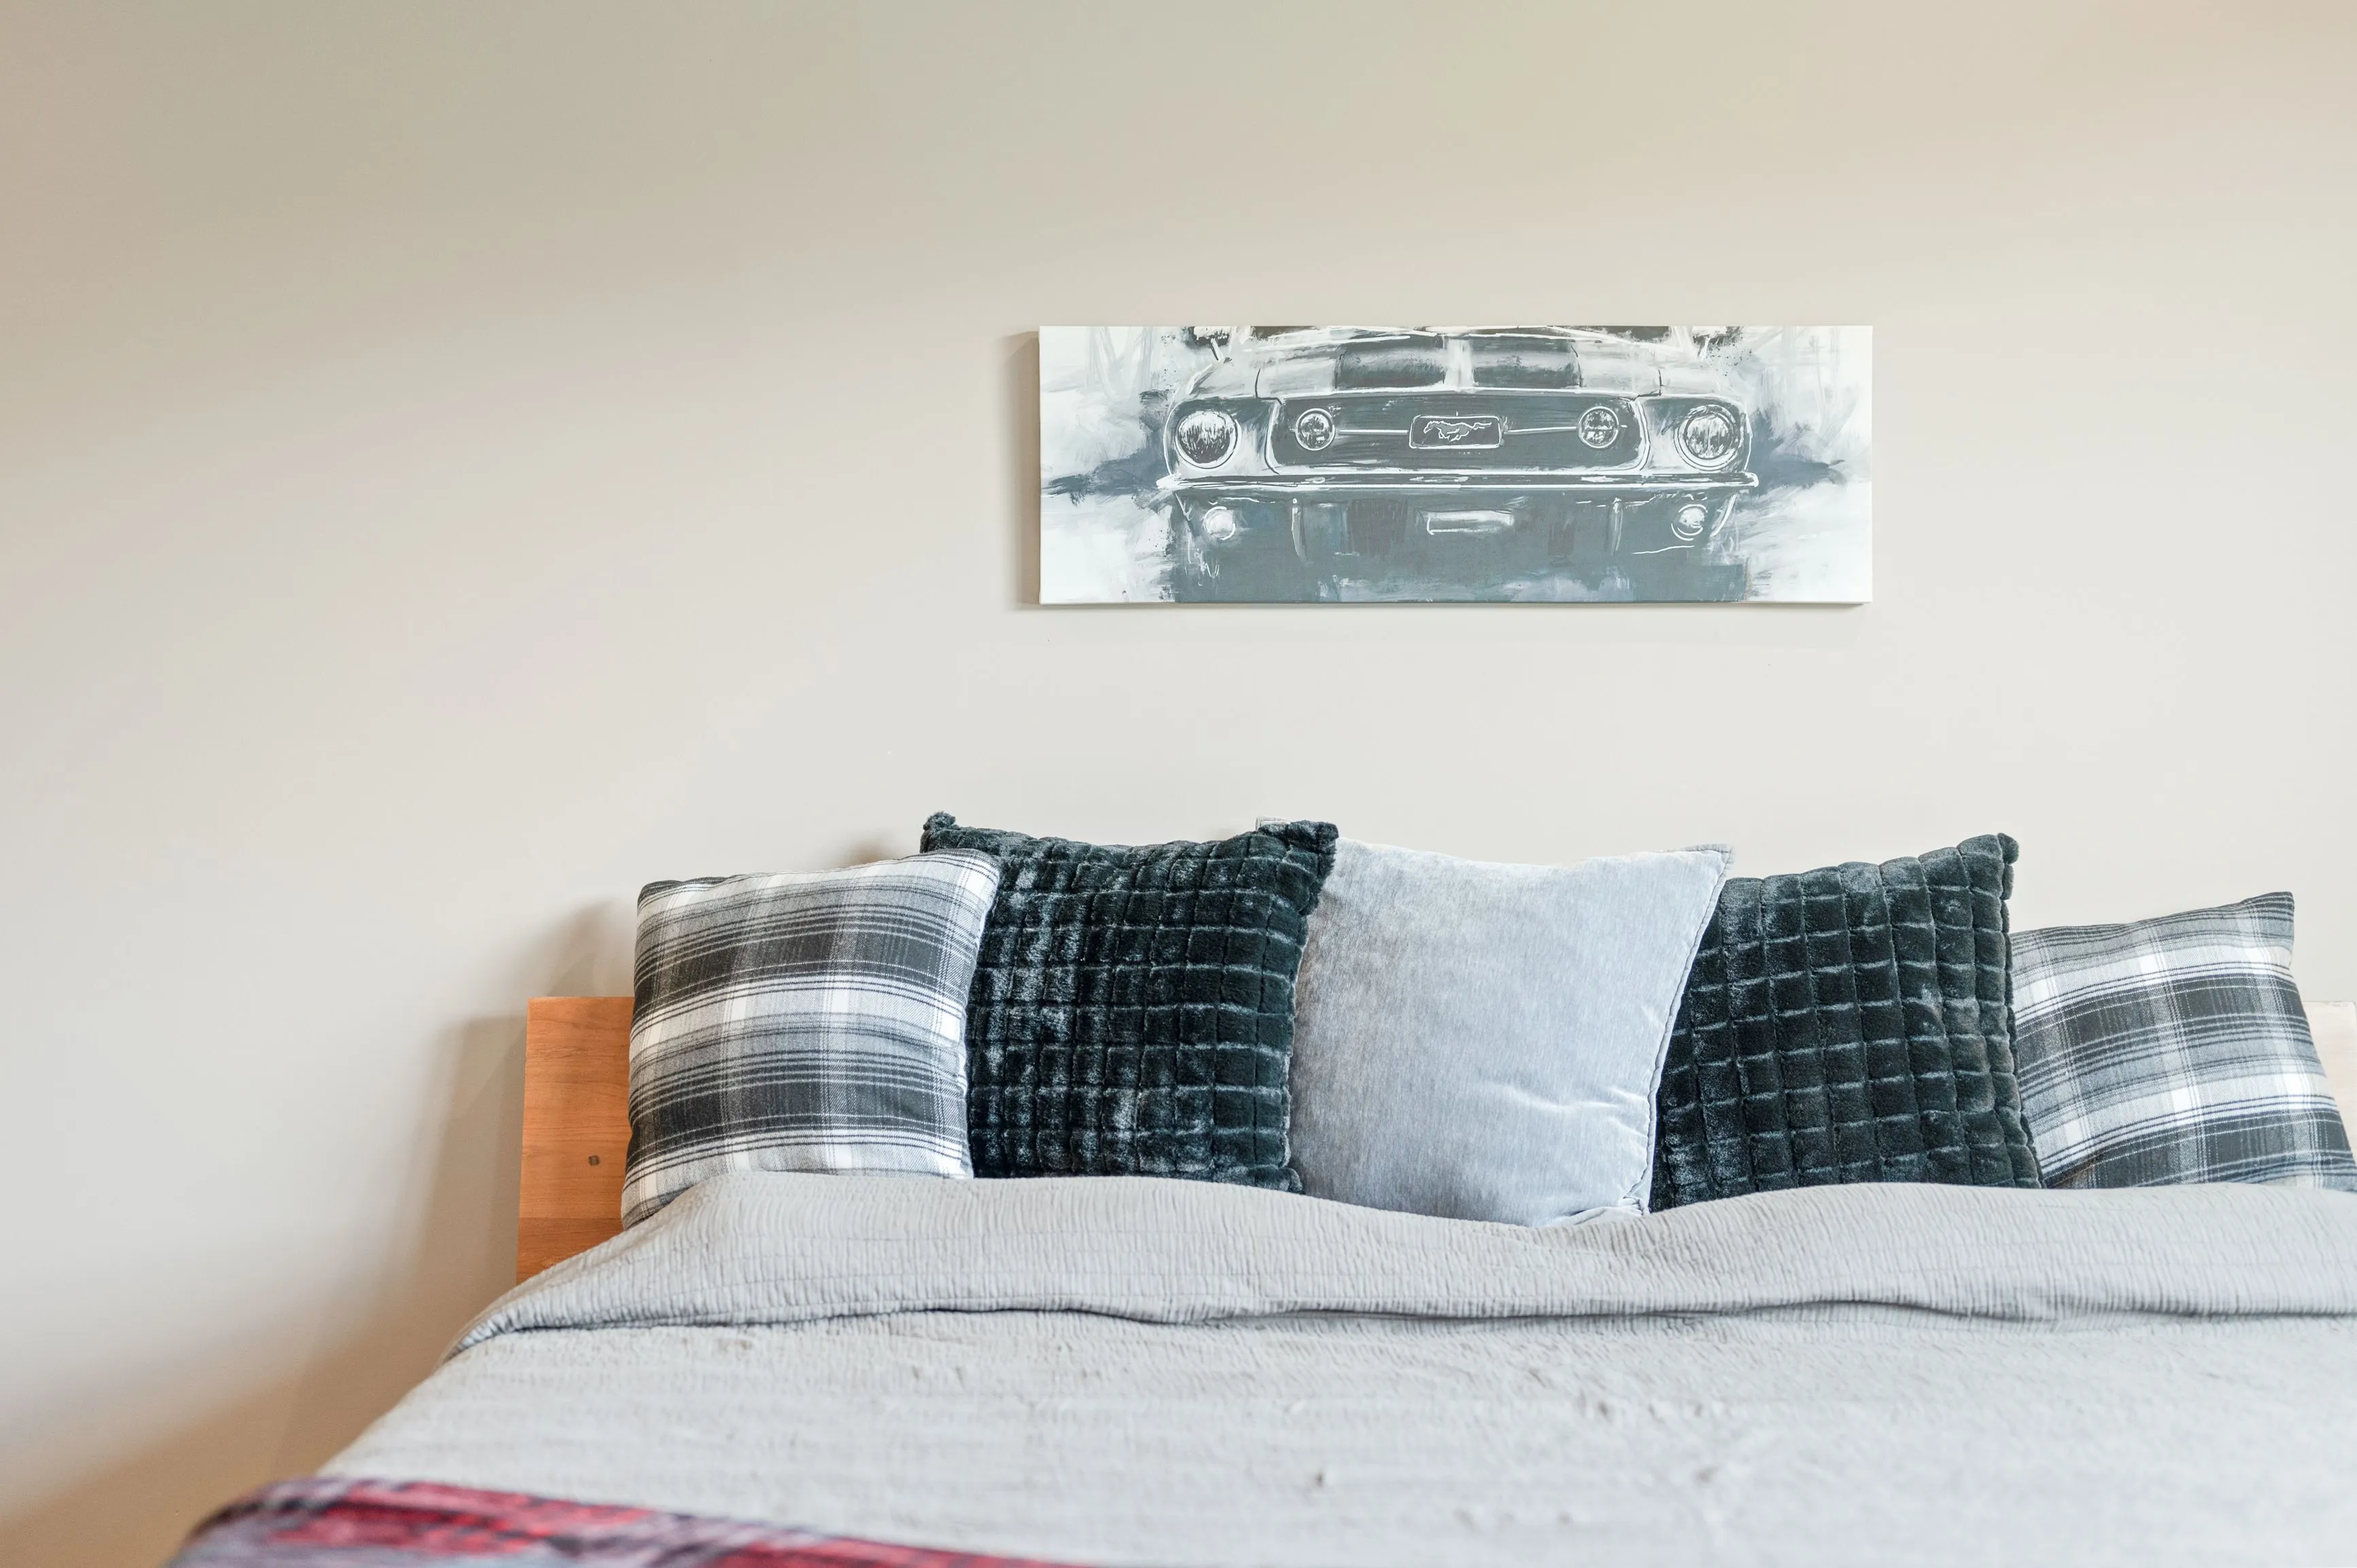 A neatly made bed with plaid and solid-colored pillows against a wooden headboard, with a grayscale artwork of a classic car hanging above on a light-colored wall.